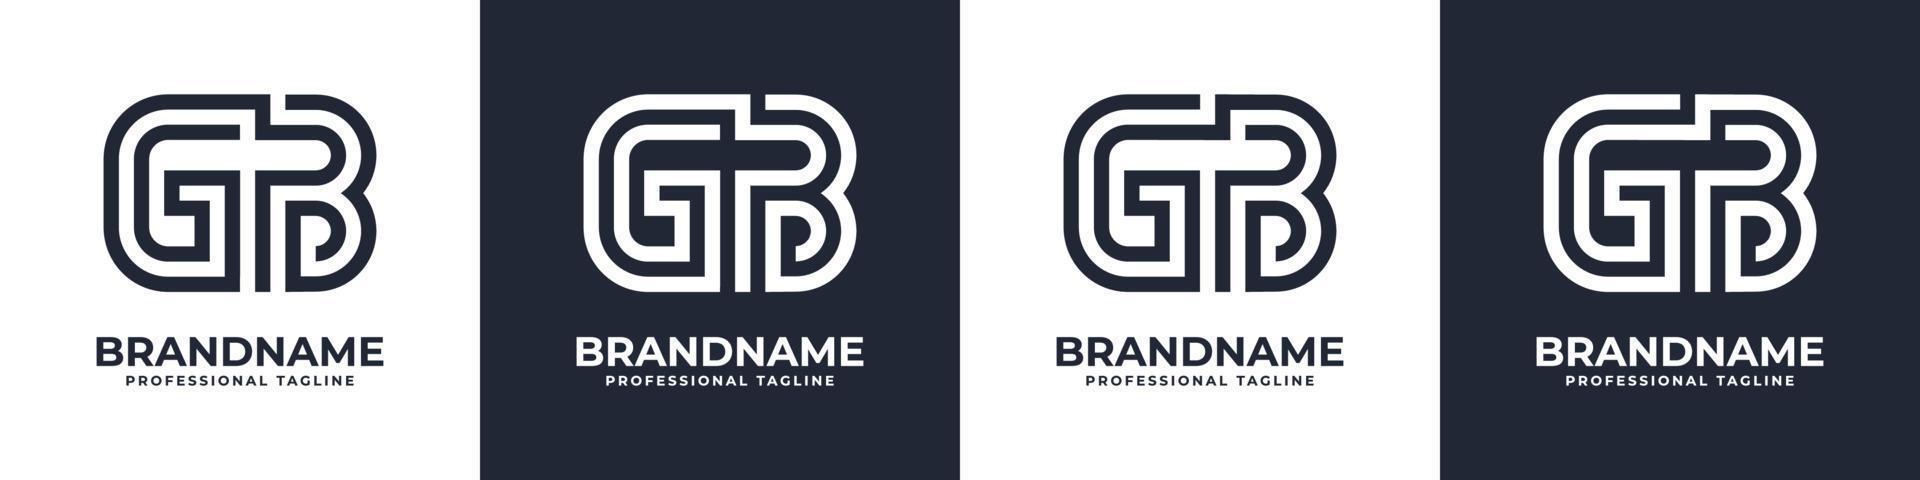 Letter GB or BG Global Technology Monogram Logo, suitable for any business with GB or BG initials. vector